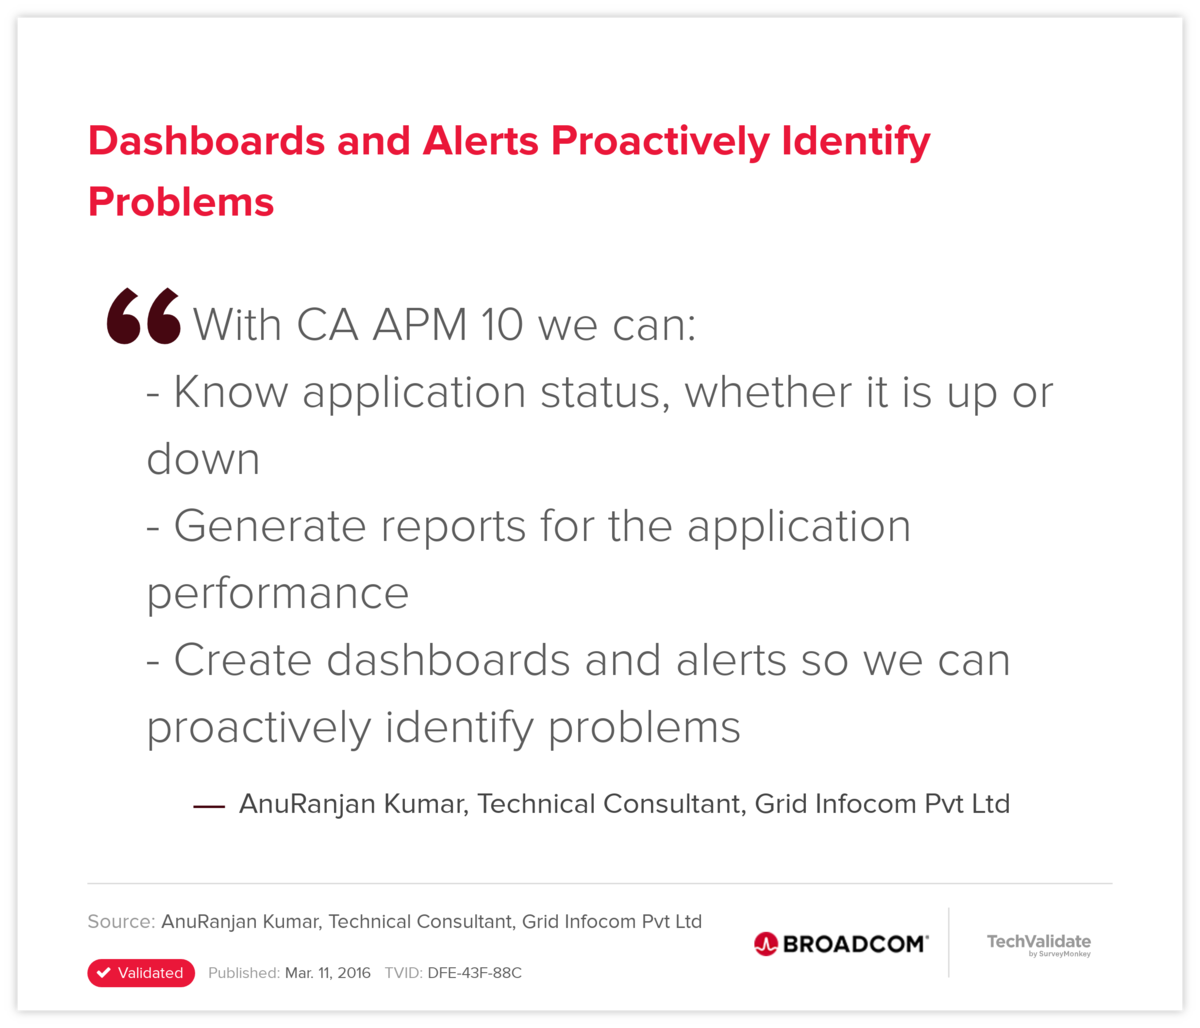 Dashboards and Alerts Proactively Identify Problems